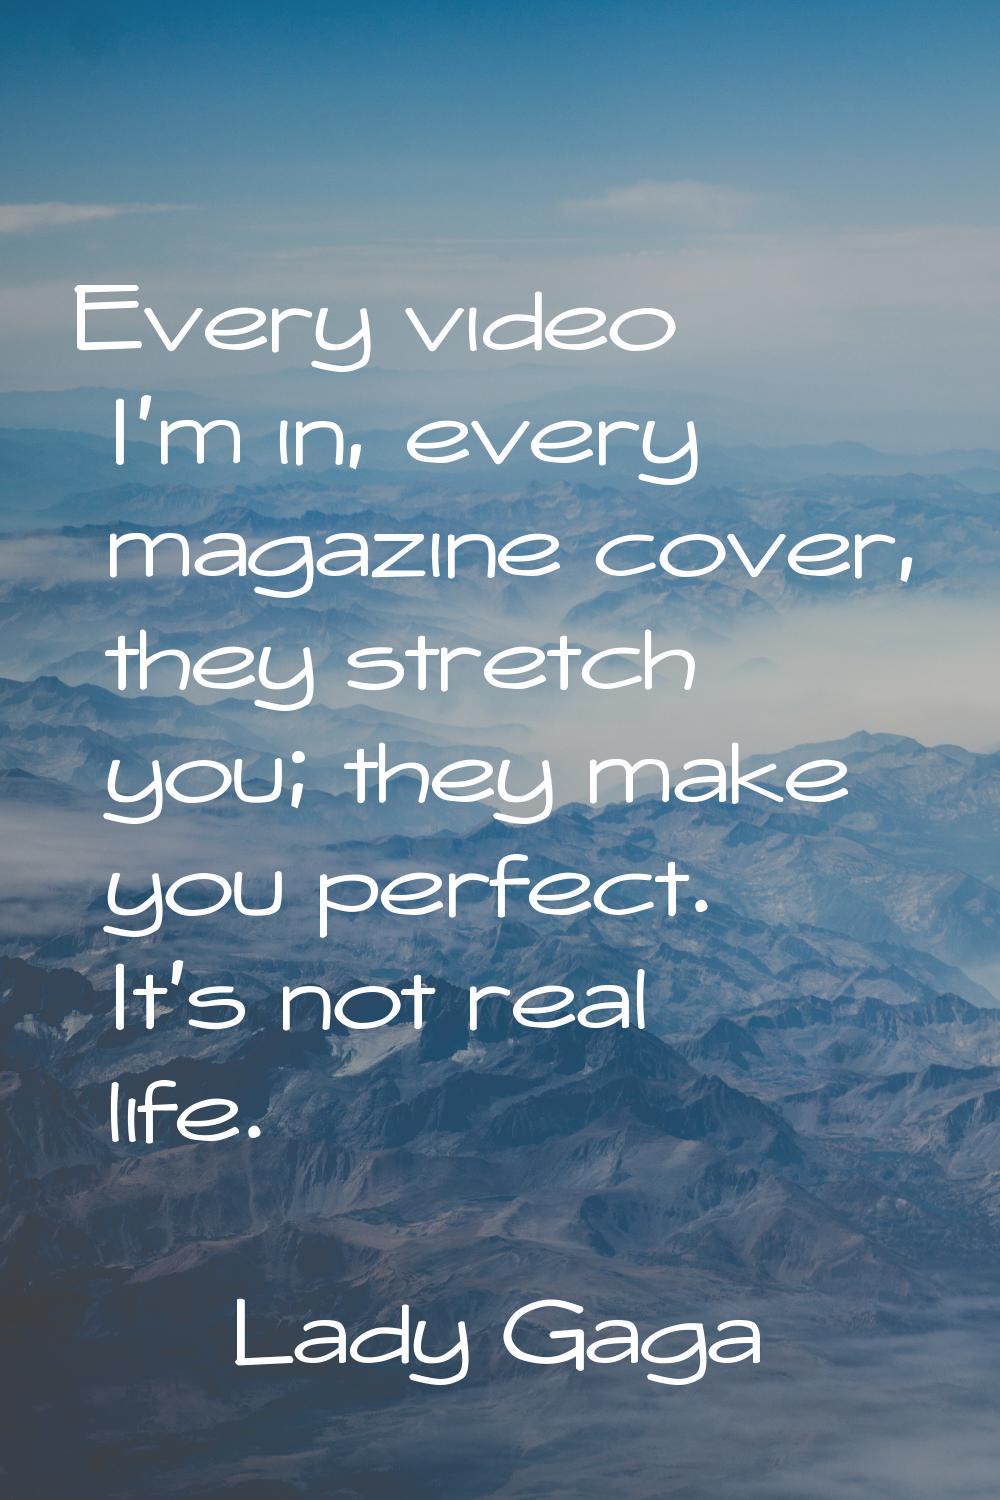 Every video I'm in, every magazine cover, they stretch you; they make you perfect. It's not real li